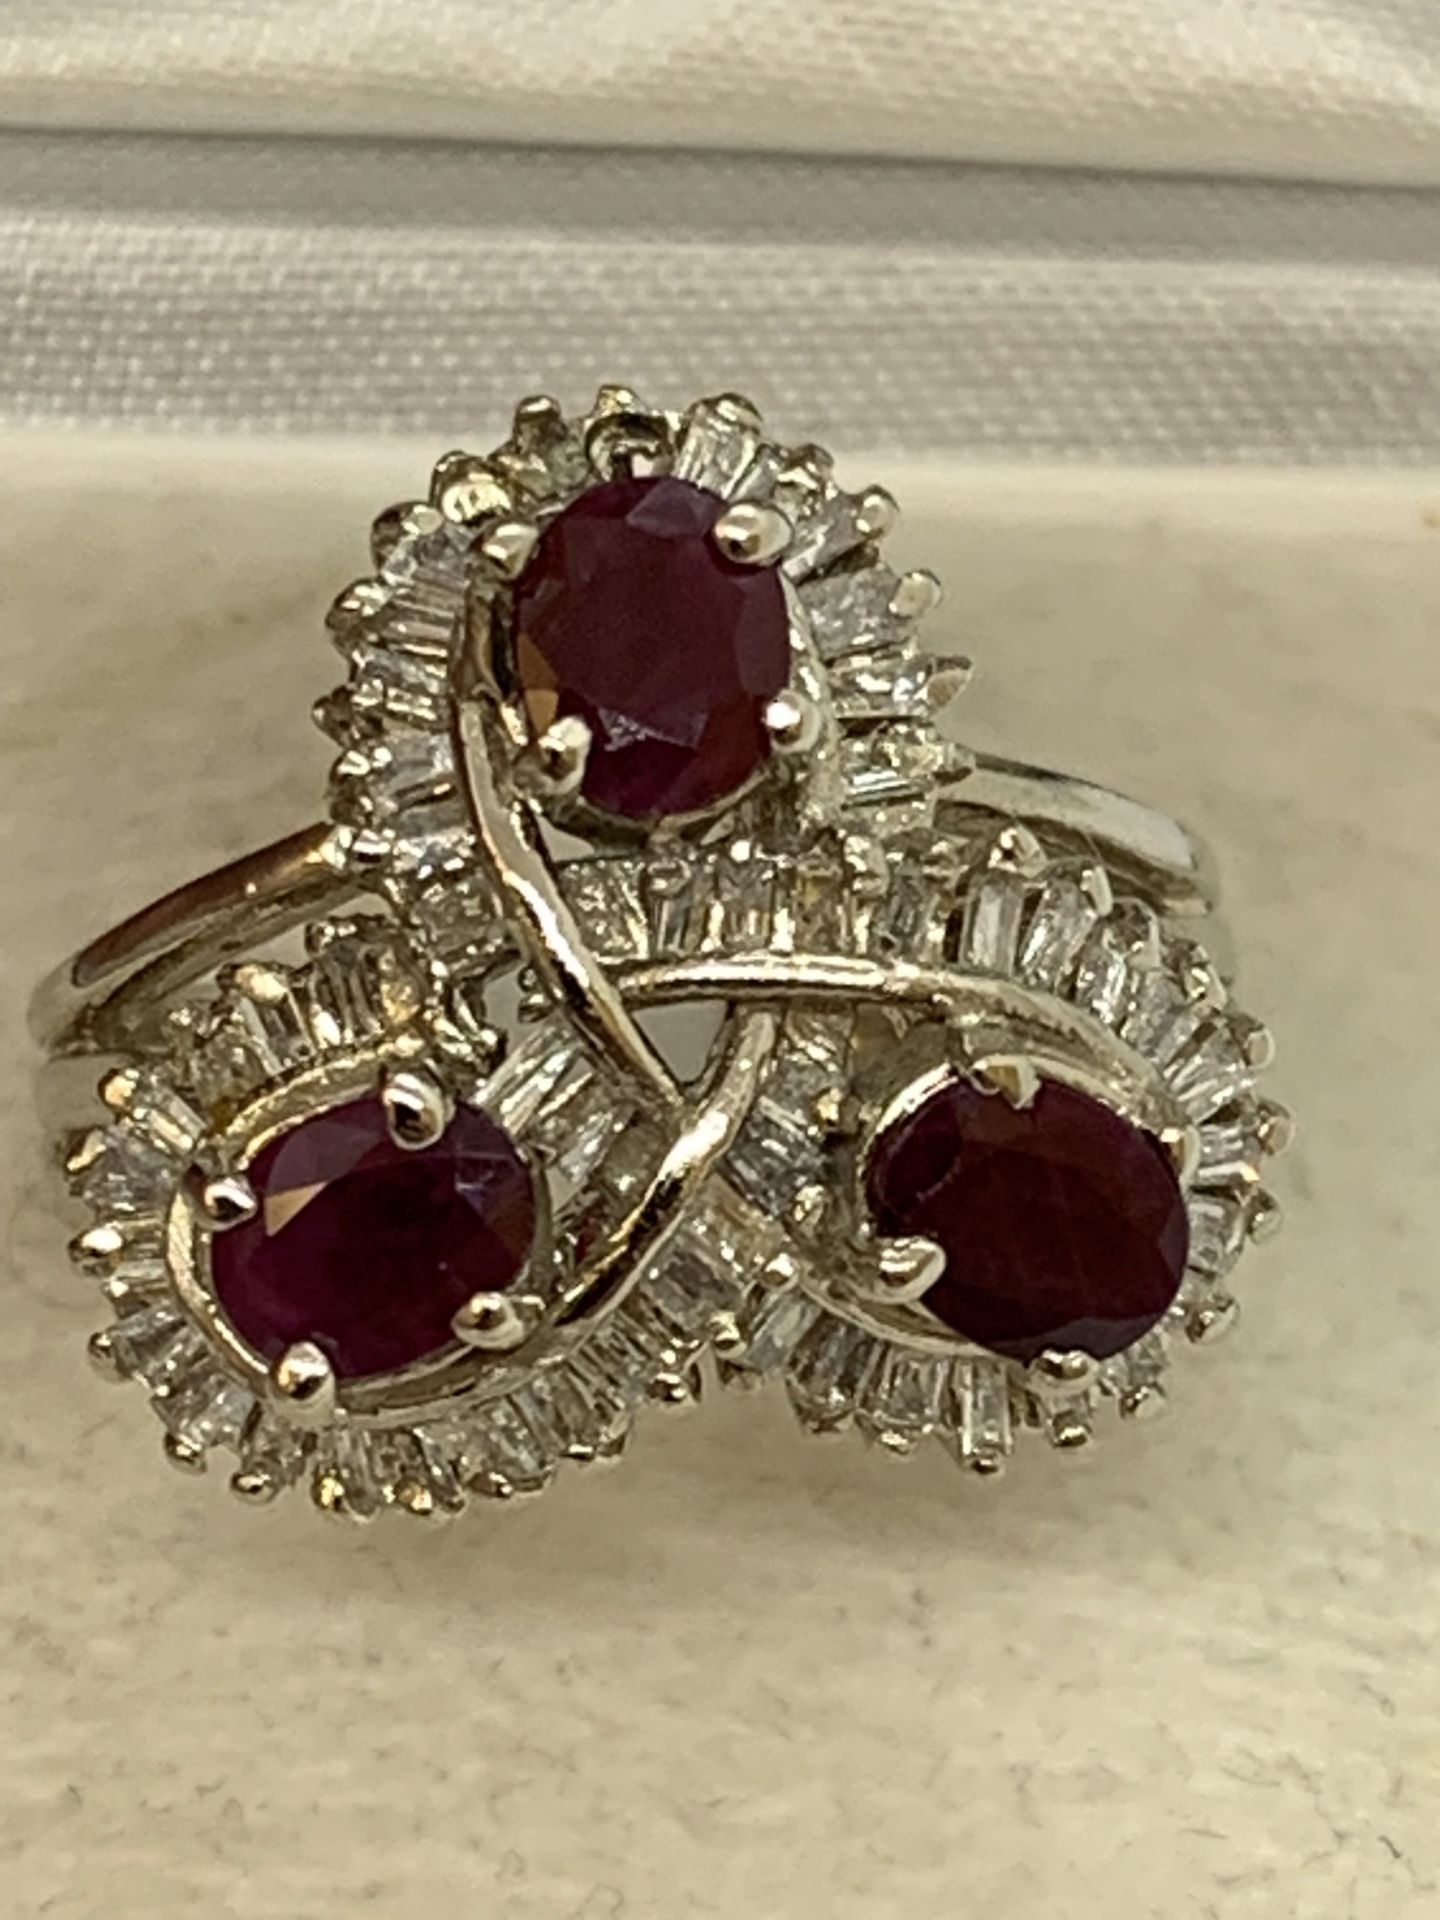 TRIPLE RUBY & DIAMOND SET RING IN 14ct GOLD - 6.8g APPROX - SIZE M APPROX - Image 7 of 8